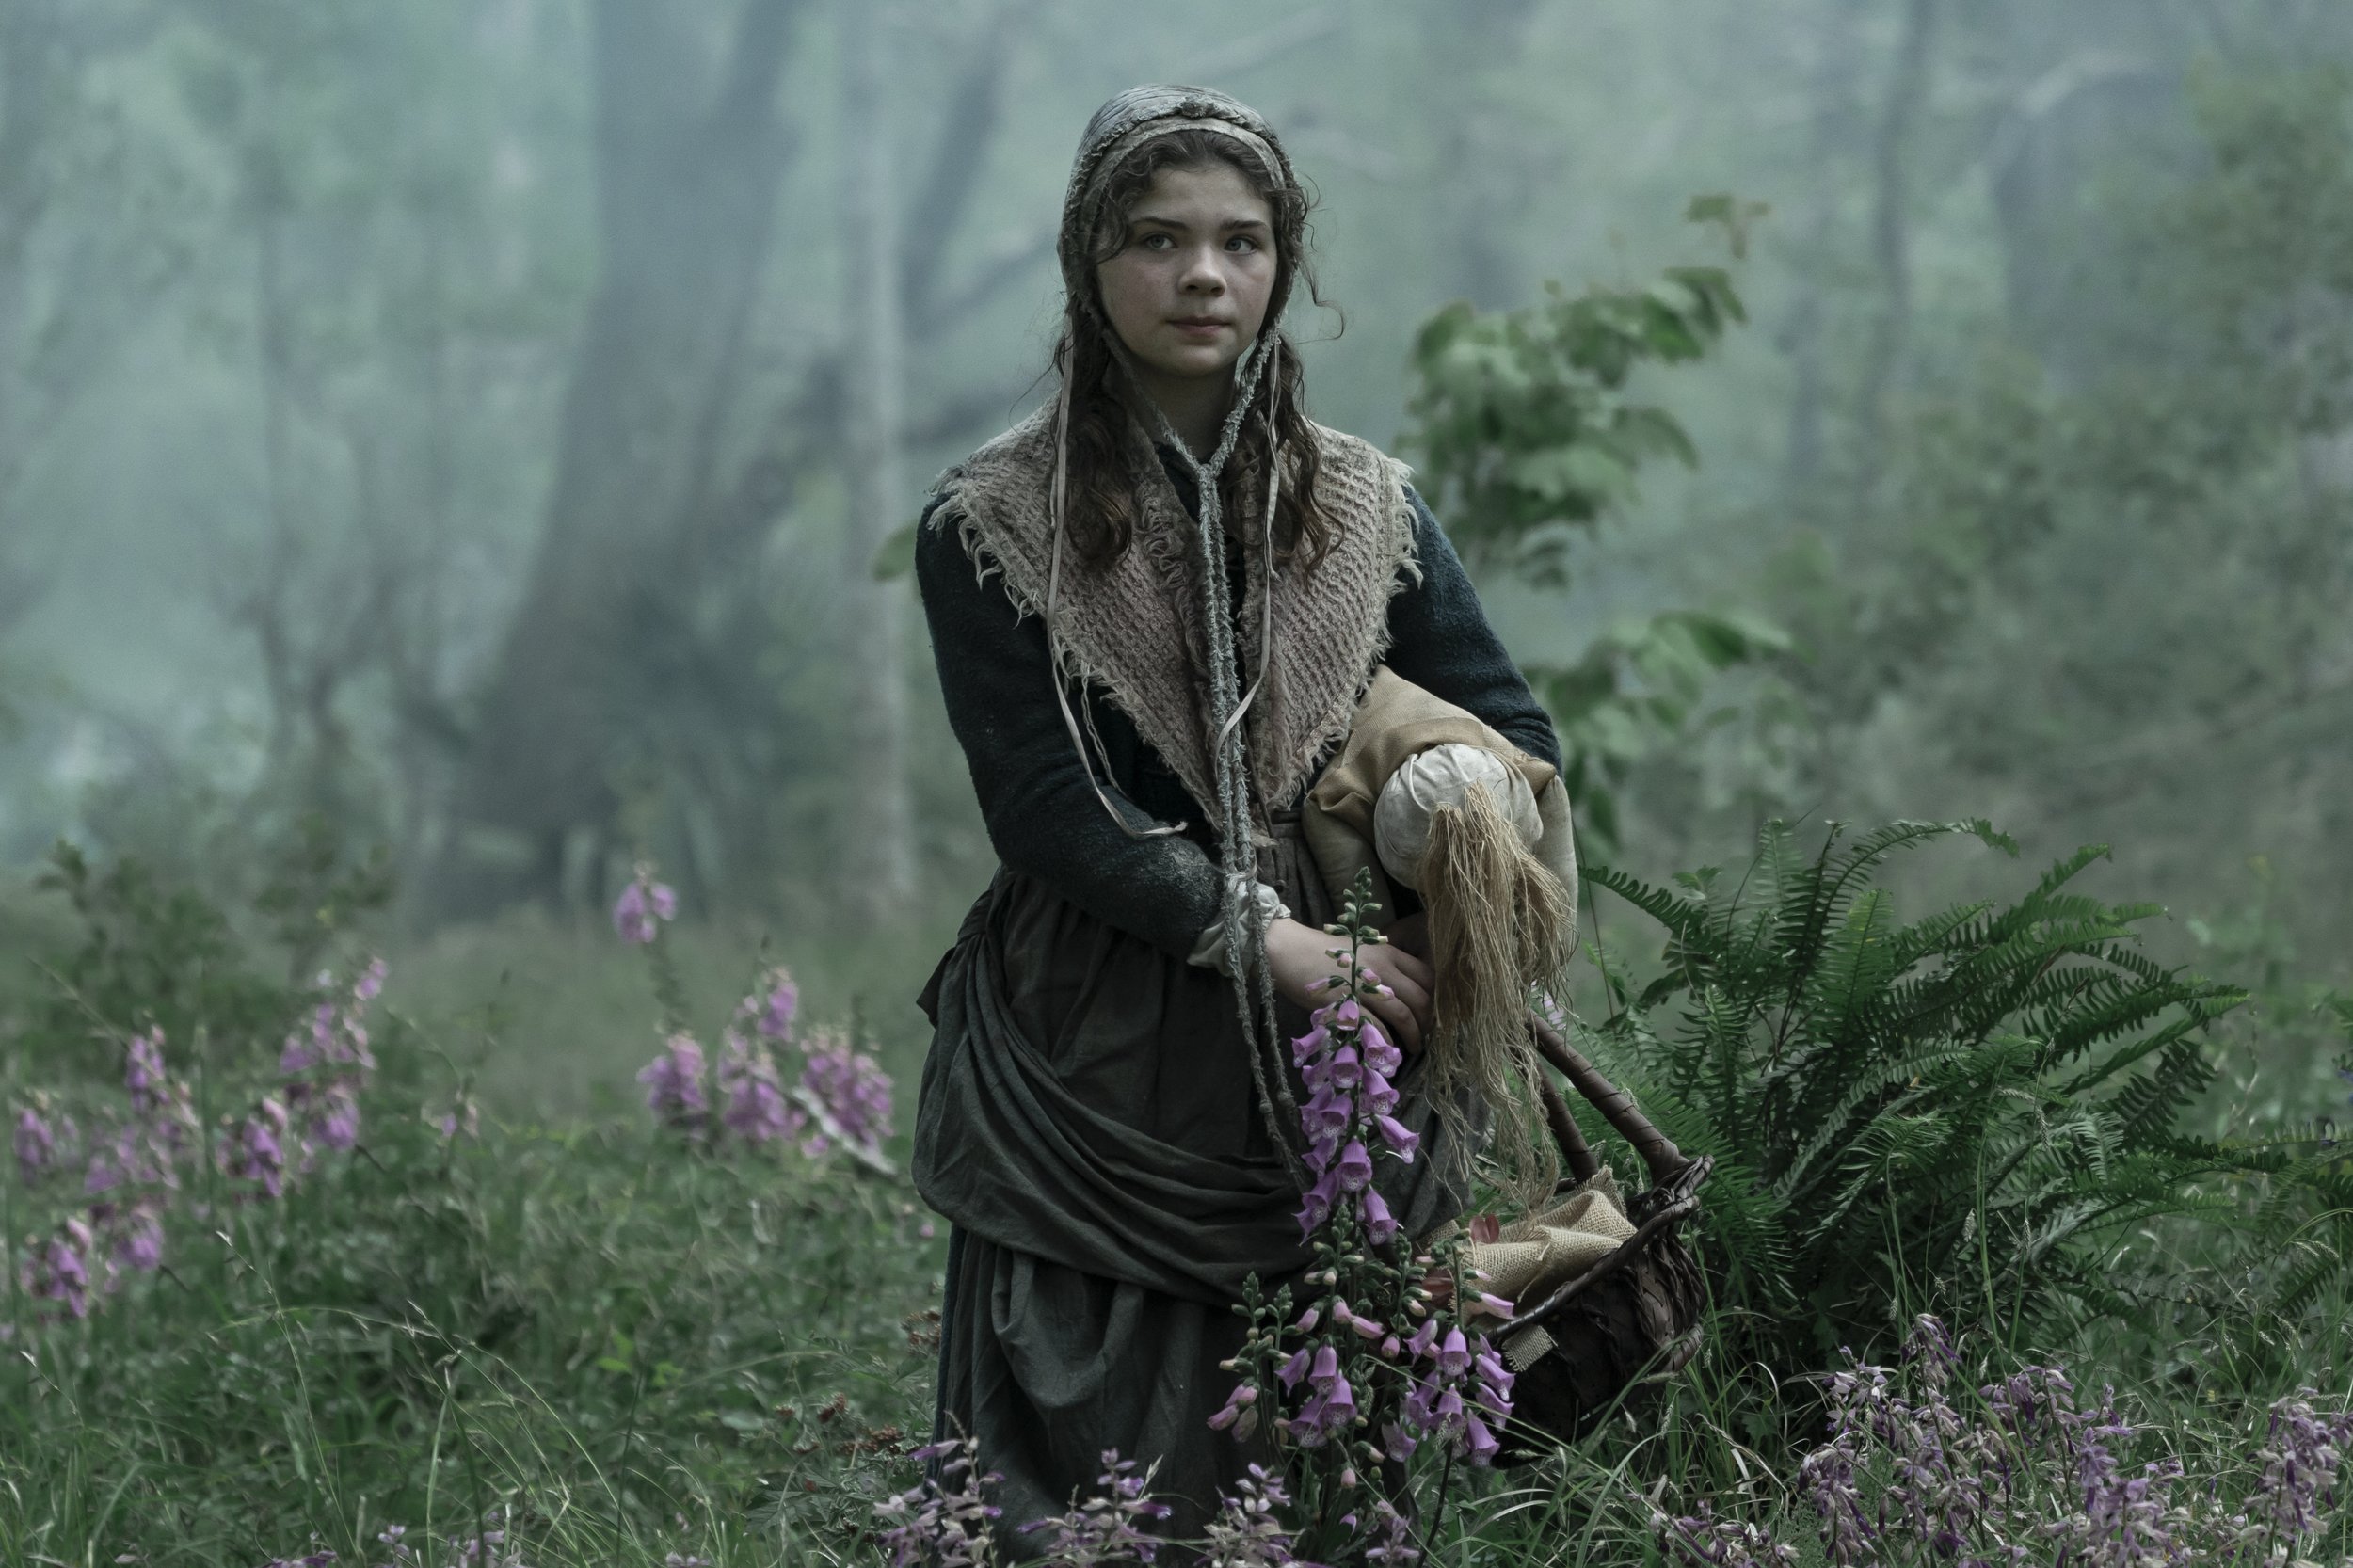  Emma Rose Smith as Florie - Mayfair Witches _ Season 1, Episode 2 - Photo Credit: Alfonso Bresciani/AMC 